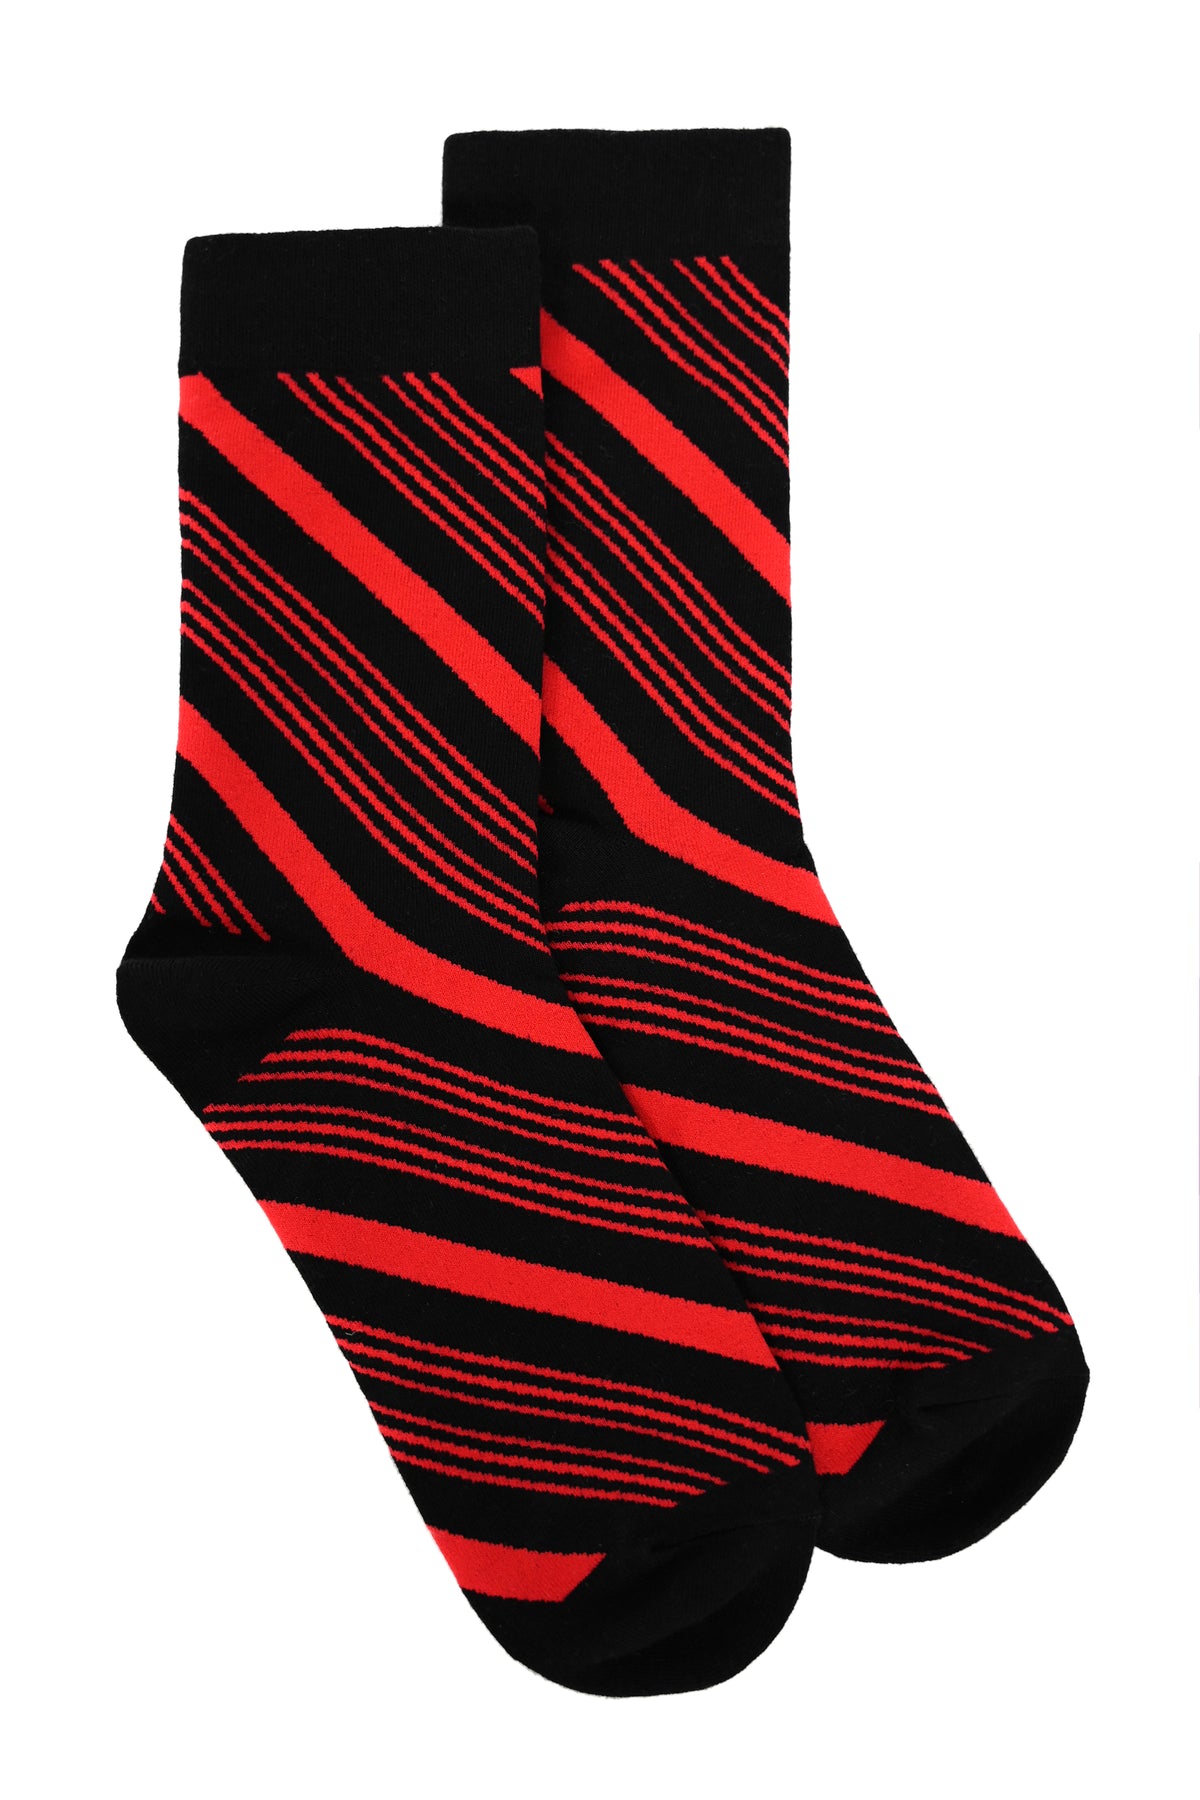 Black and Red candycane stripes  all over a comfy sock!